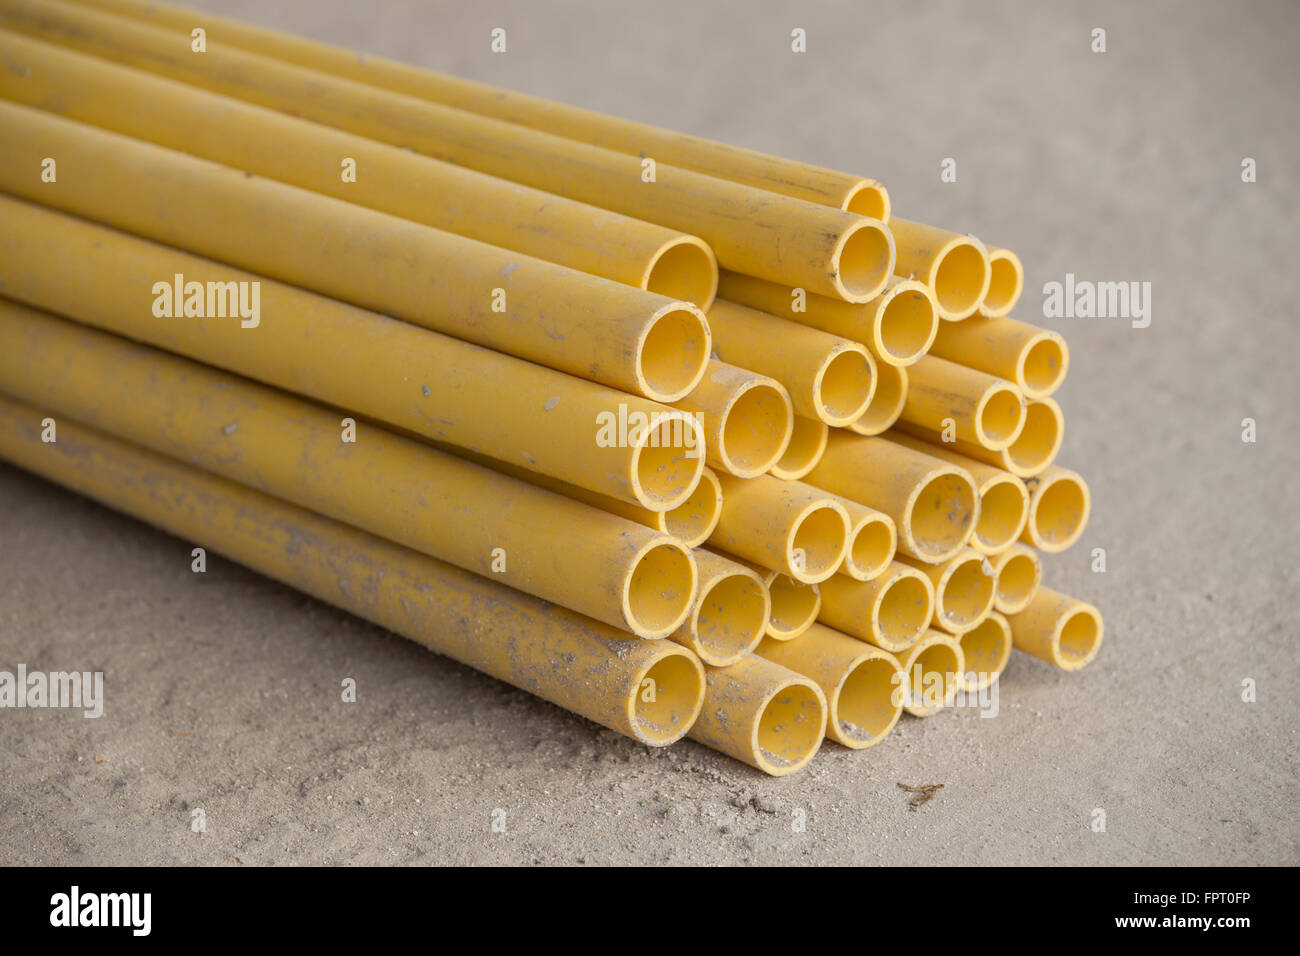 yellow PVC pipes for electric conduit Stock Photo